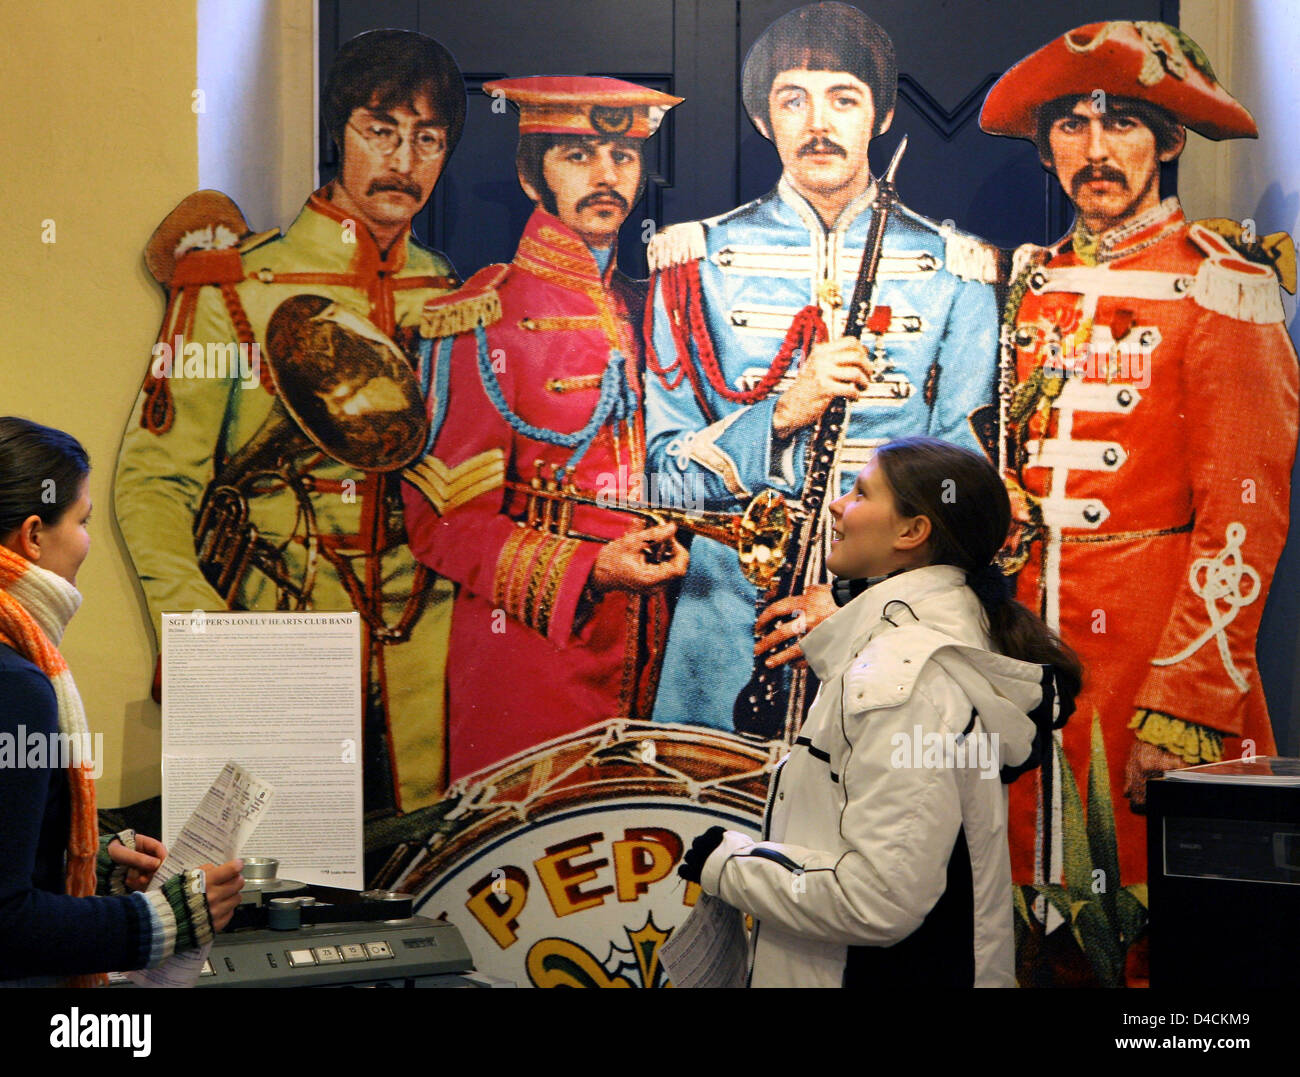 Visitors stand in front of the enlarged cover image of the 1967 record 'Sgt.  Pepper's Lonely Hearts Club Band', showing the legendary musicians John  Lennon, Paul Mc Cartney, George Harrison and Ringo